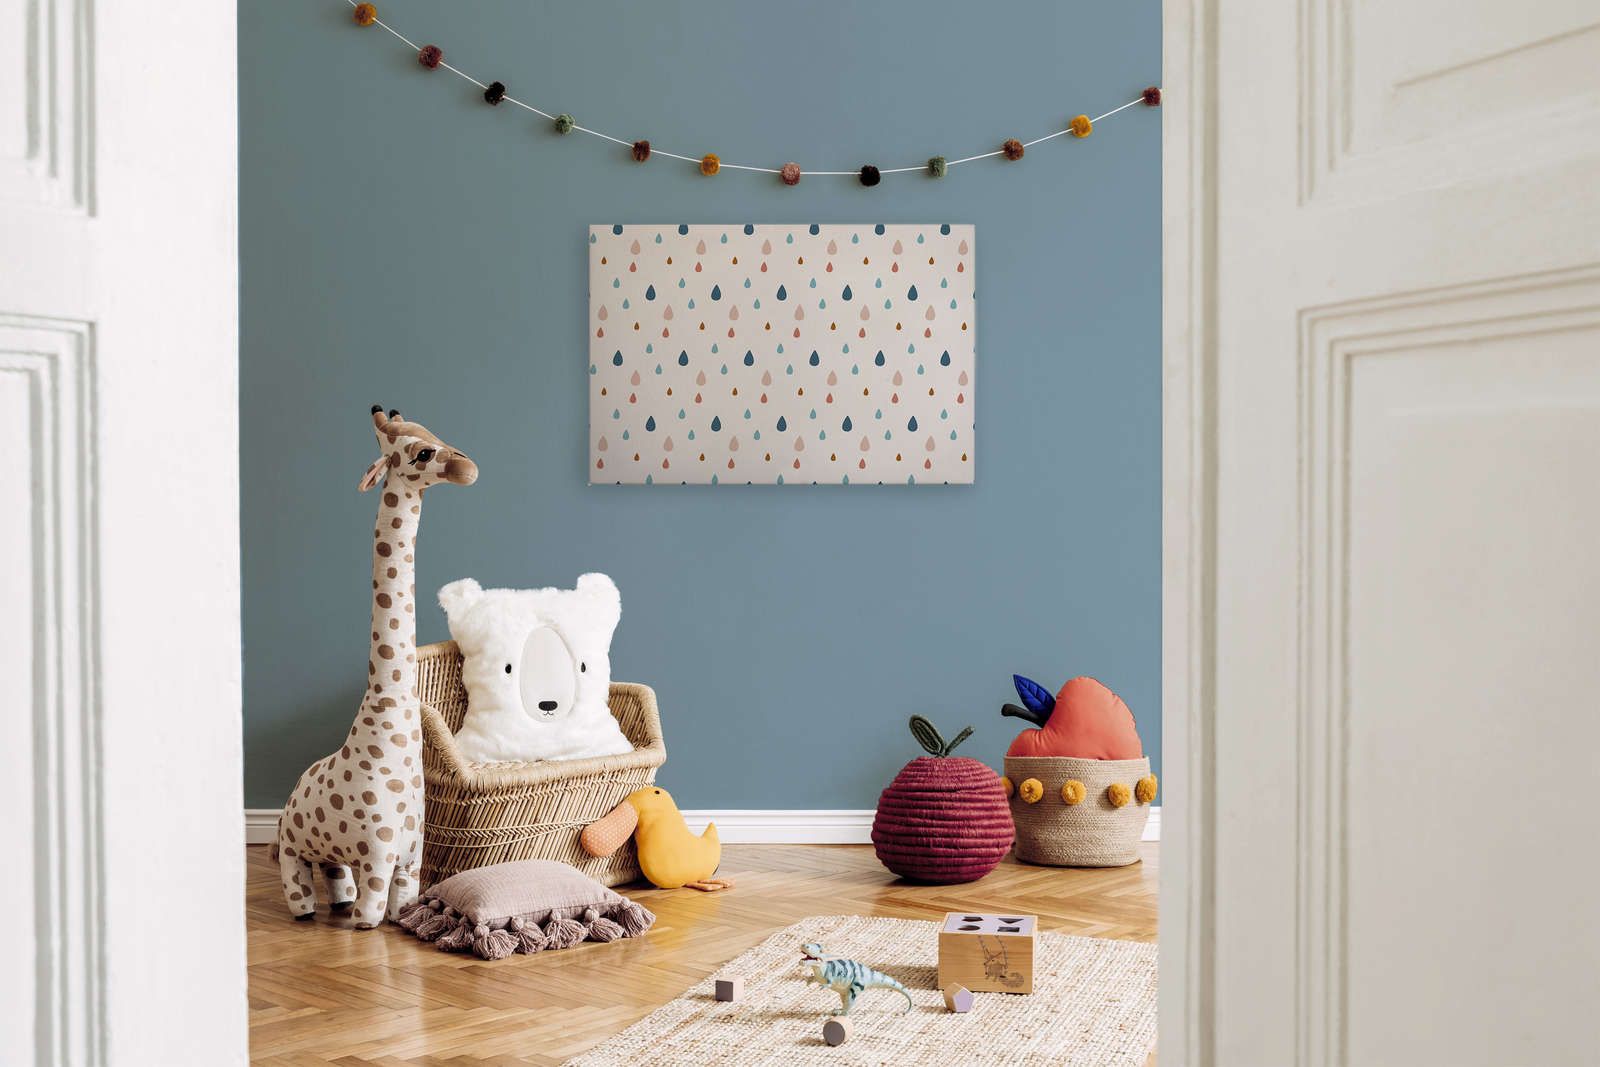             Canvas for children's room with colourful water drops - 90 cm x 60 cm
        